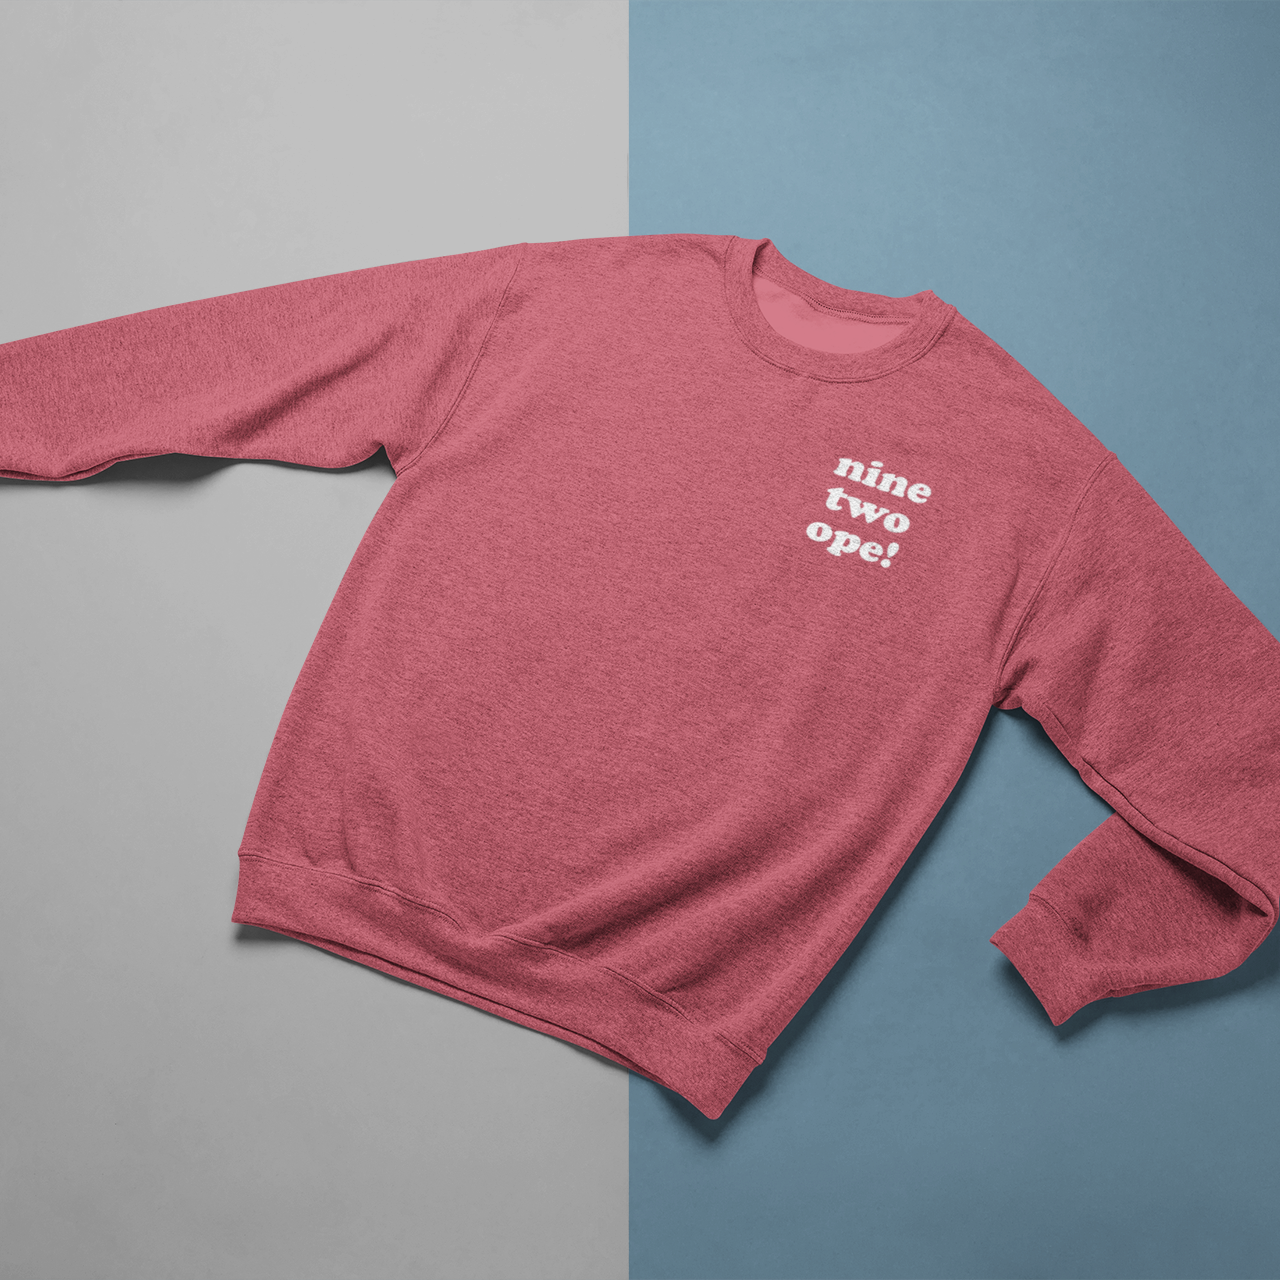 Heather Red "nine two ope!" Area Code Crewneck Sweatshirt - 3D Puff Lettering